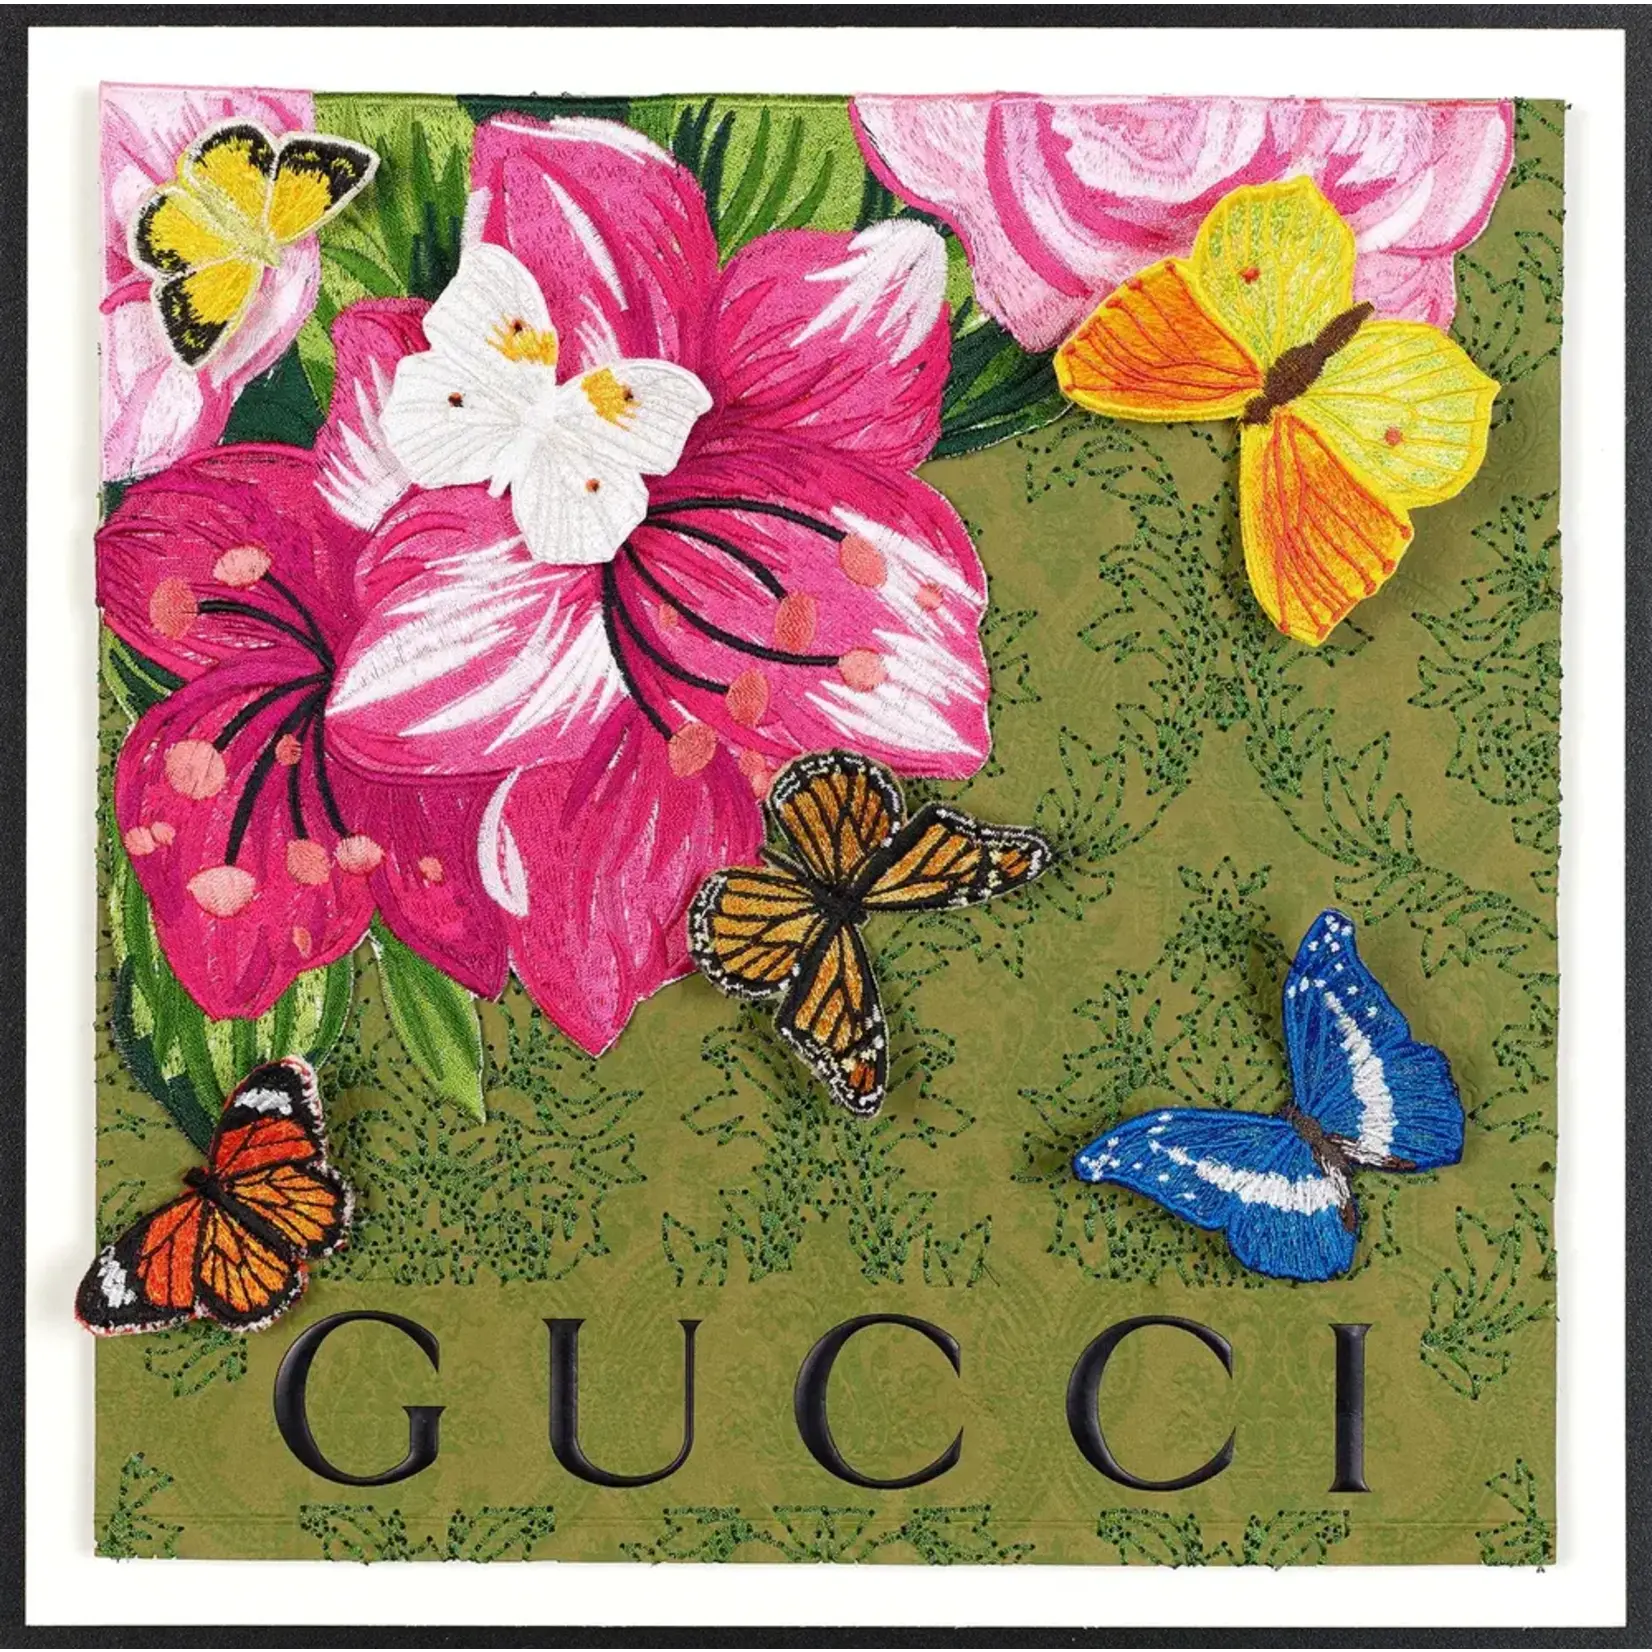 Outside The Box 12 x 12 Stephen Wilson "Gucci Floral Corner" Framed In Acrylic